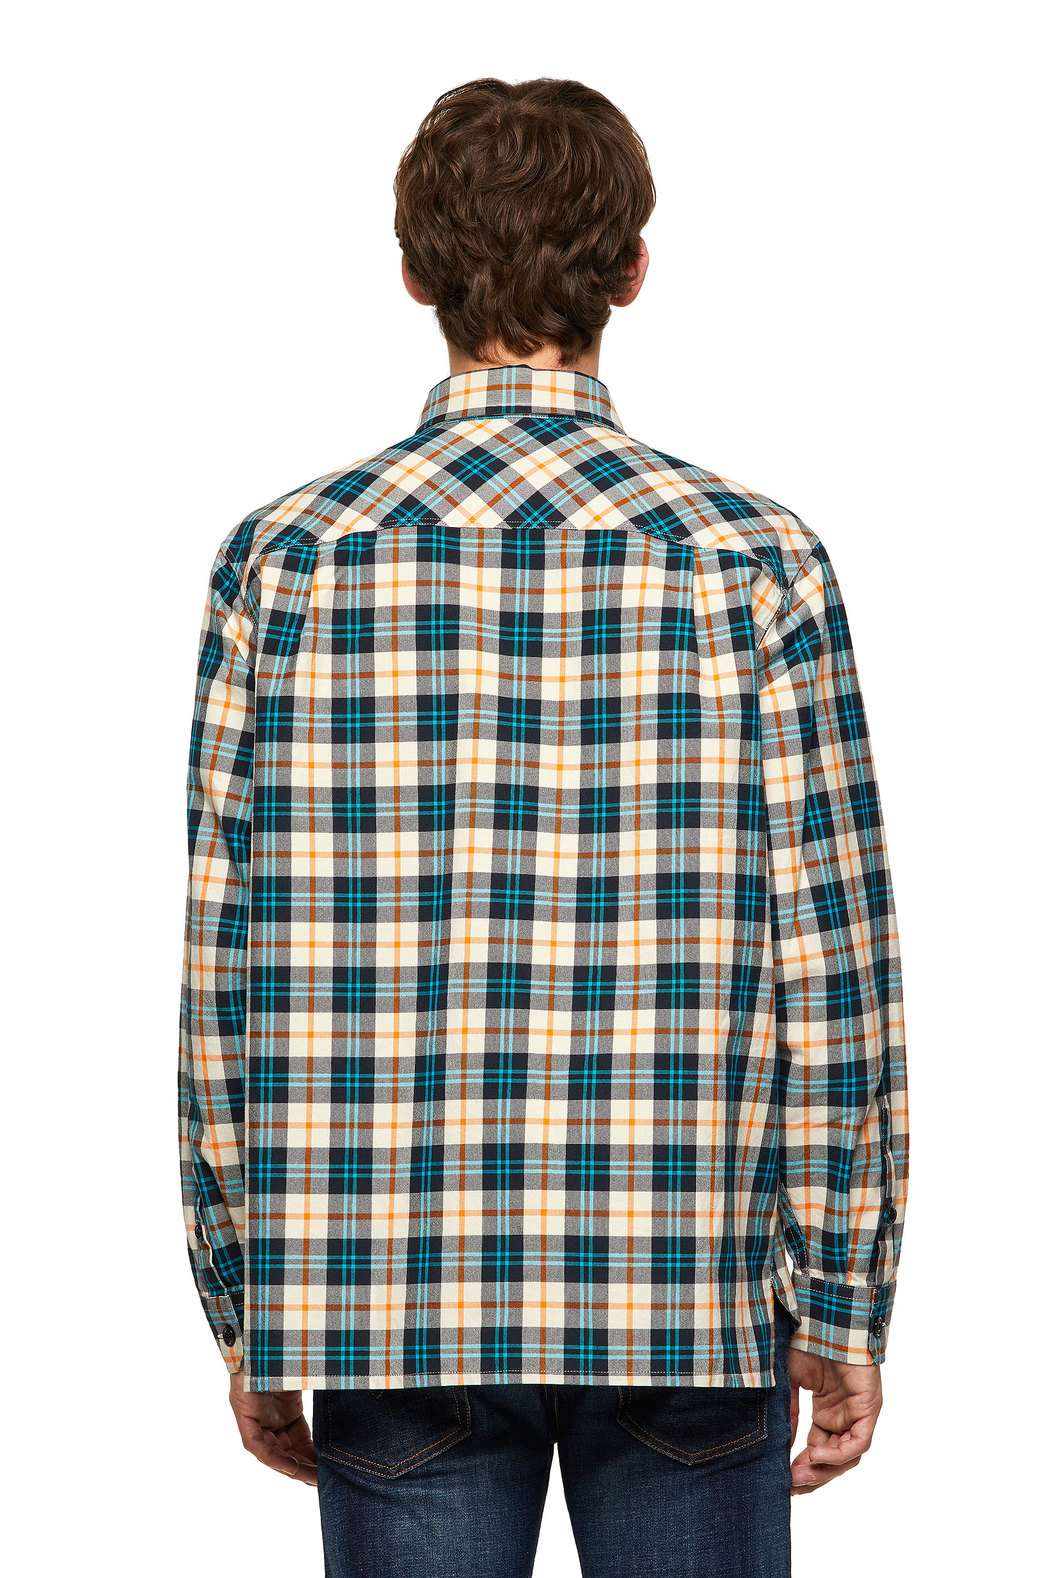 Green Label shirt in check Oxford